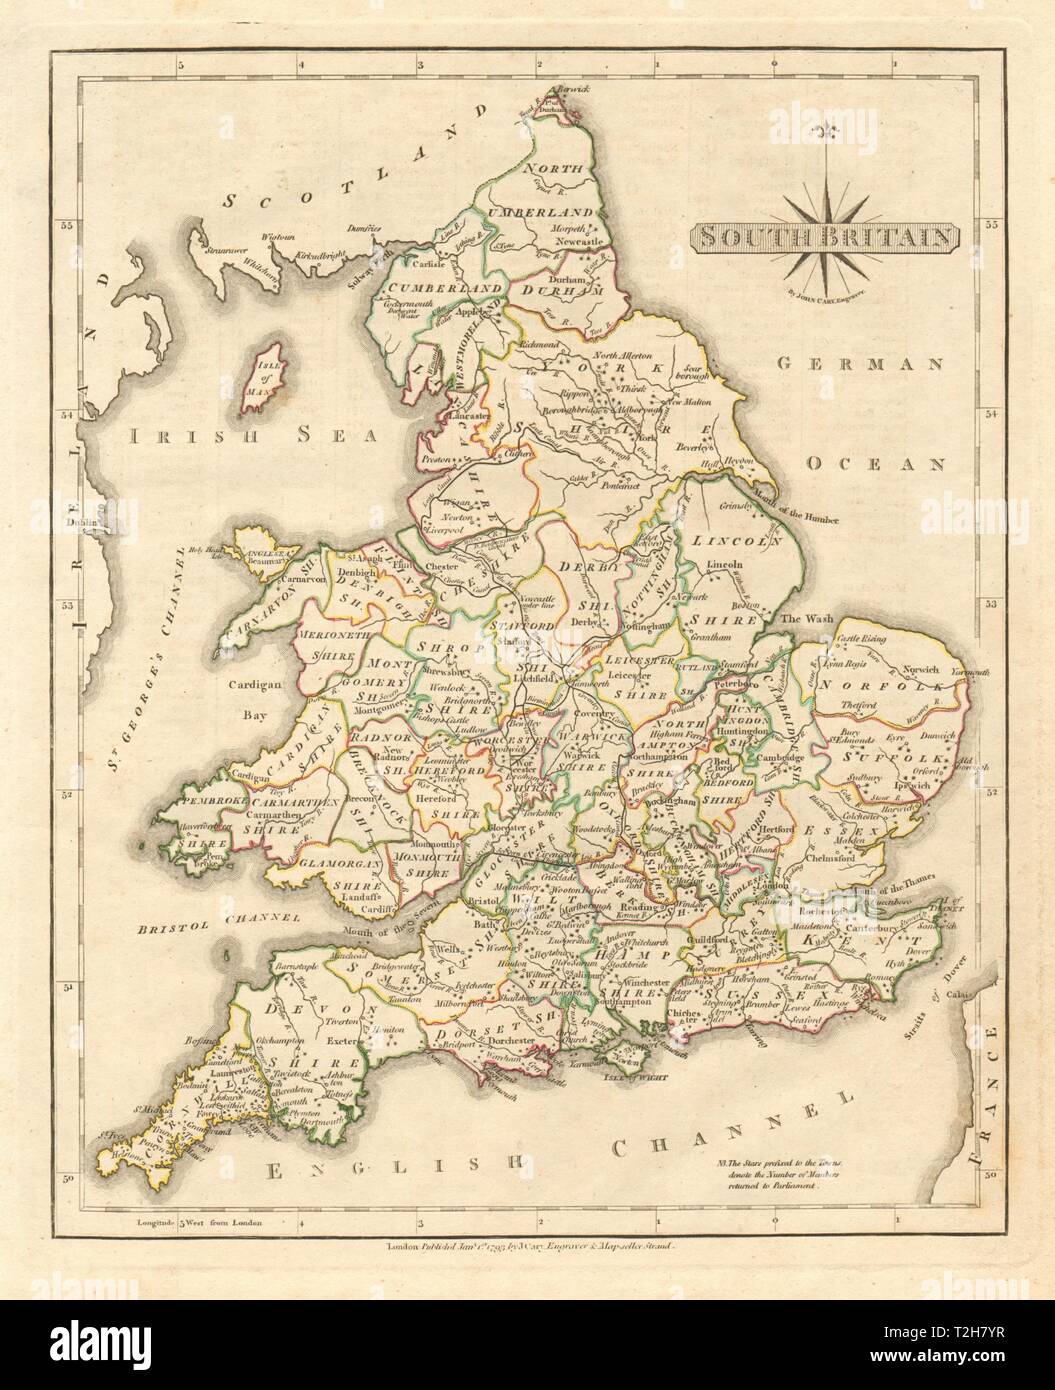 Antique map of SOUTH BRITAIN by JOHN CARY. Original outline colour 1793 Stock Photo